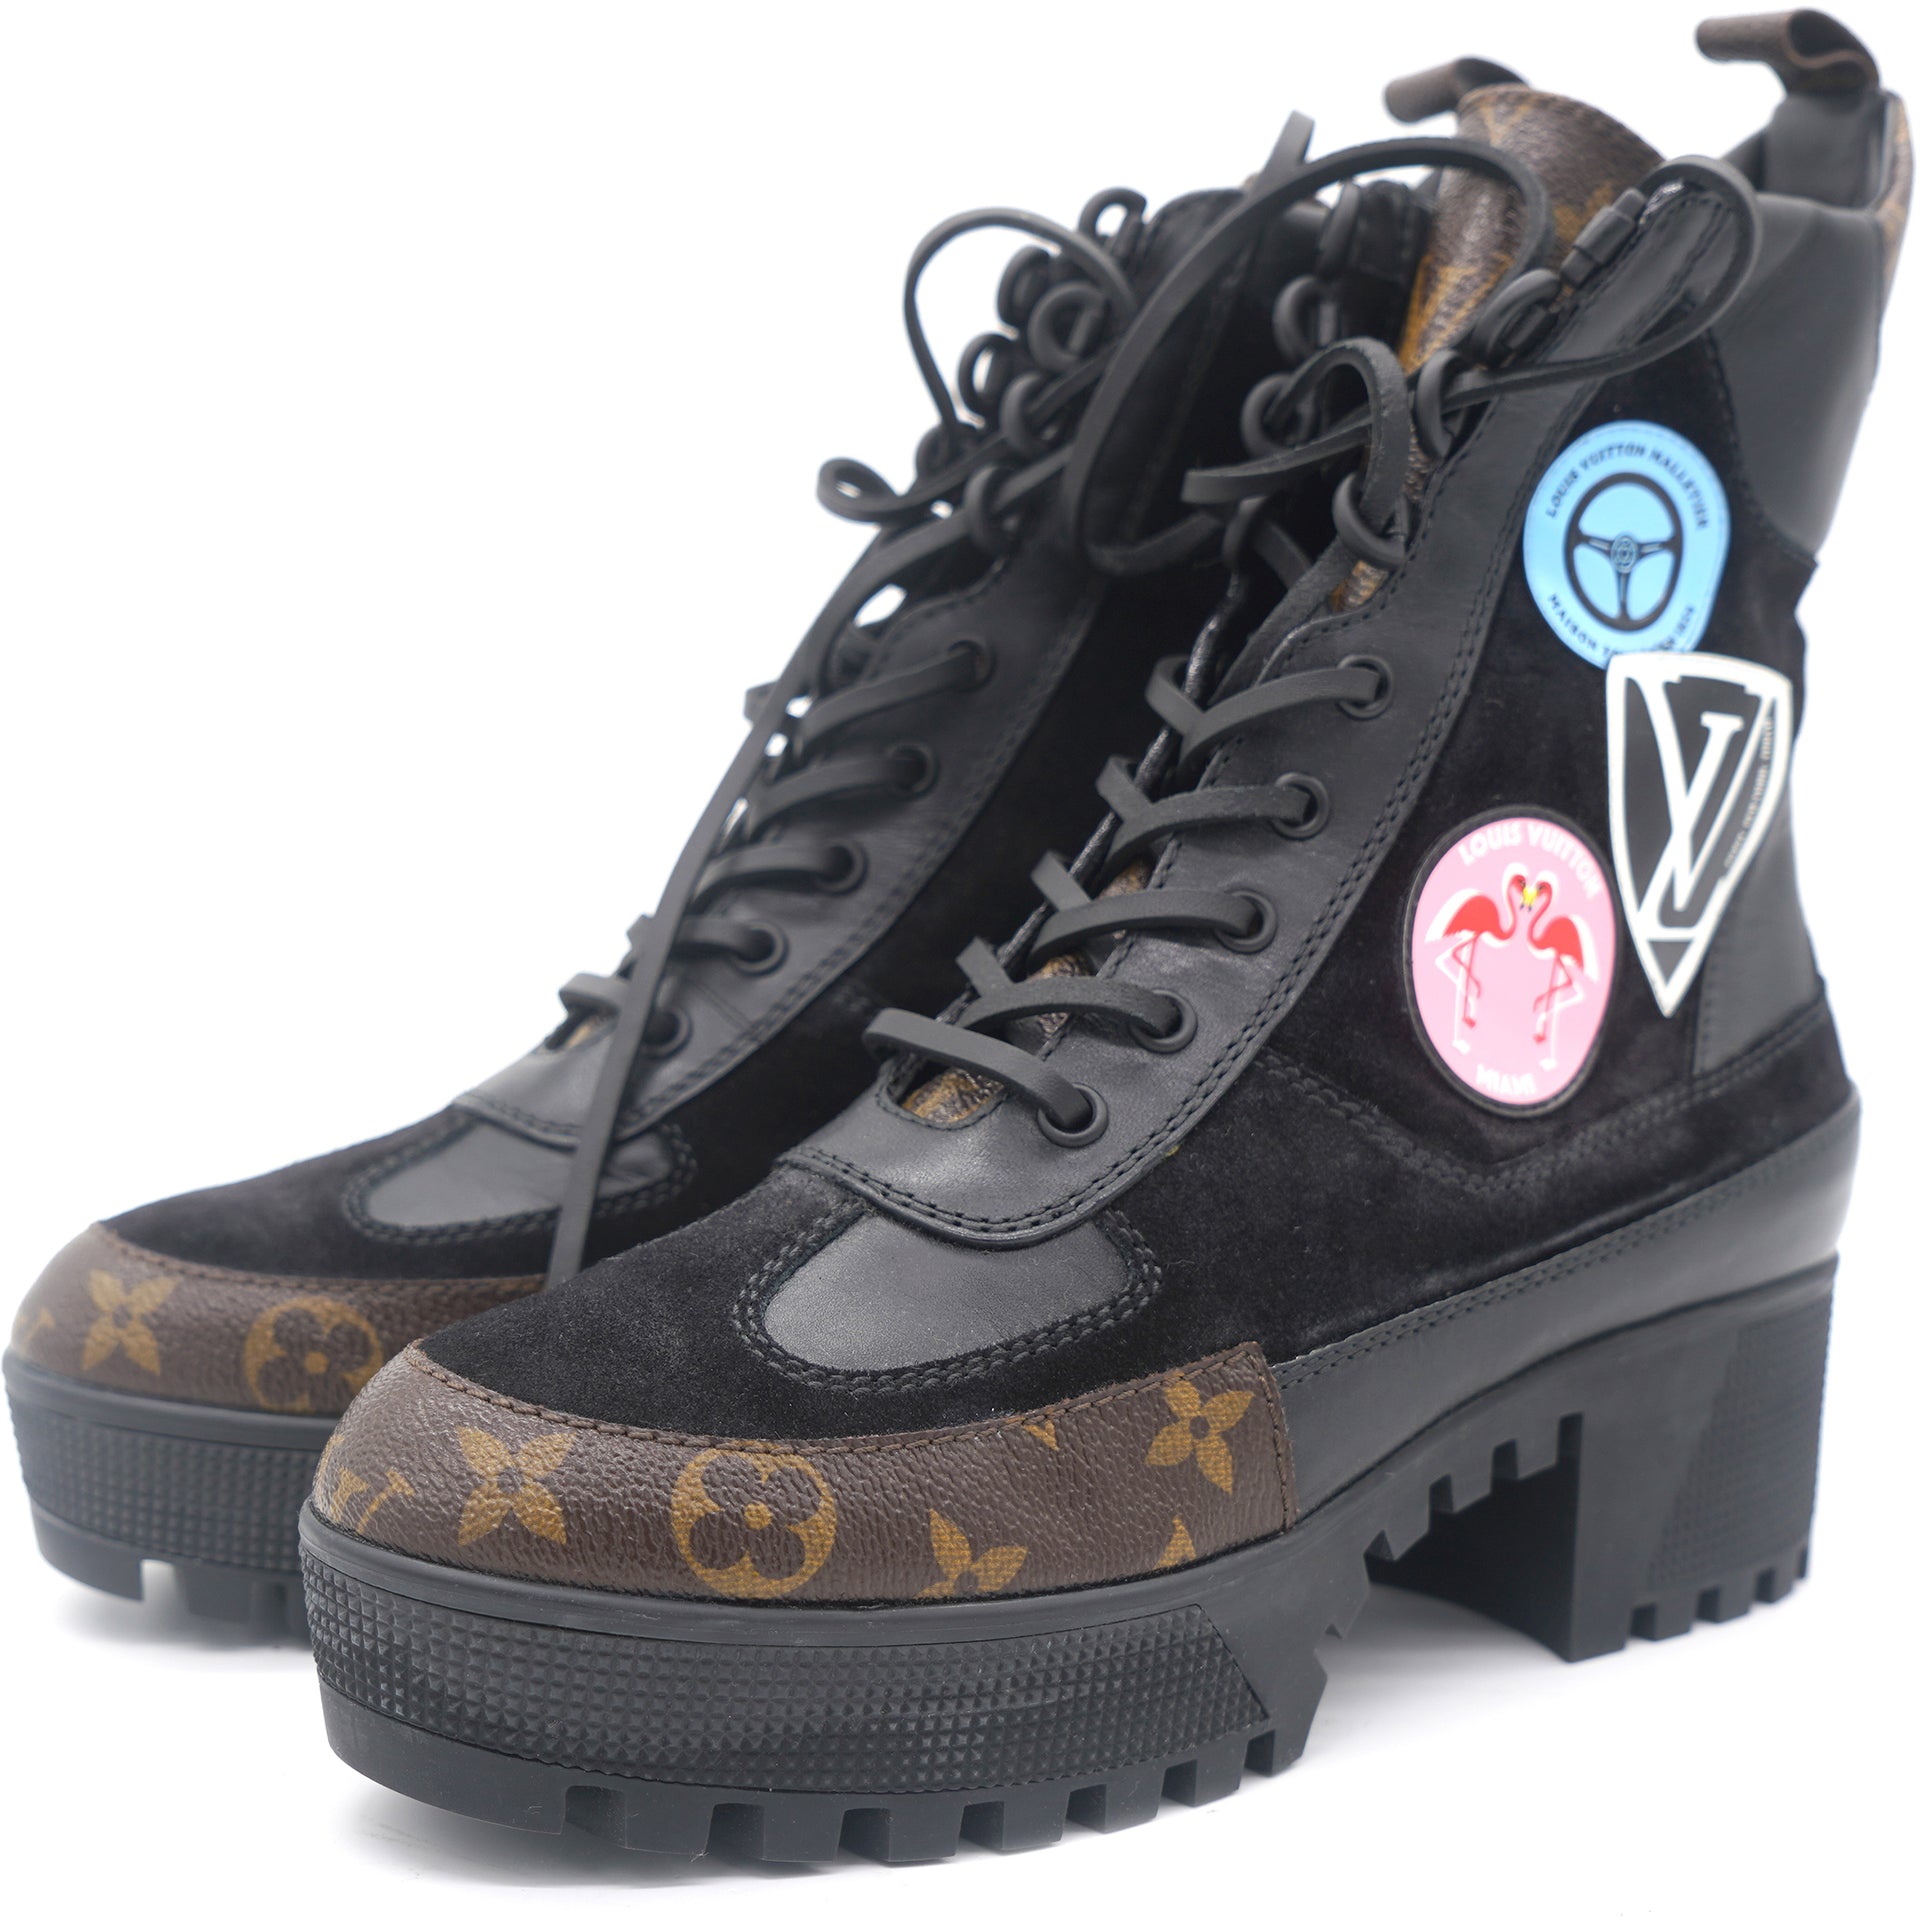 LV CHECKPOINT PATCH BOOT  Boots, Desert boots, Louis vuitton boots